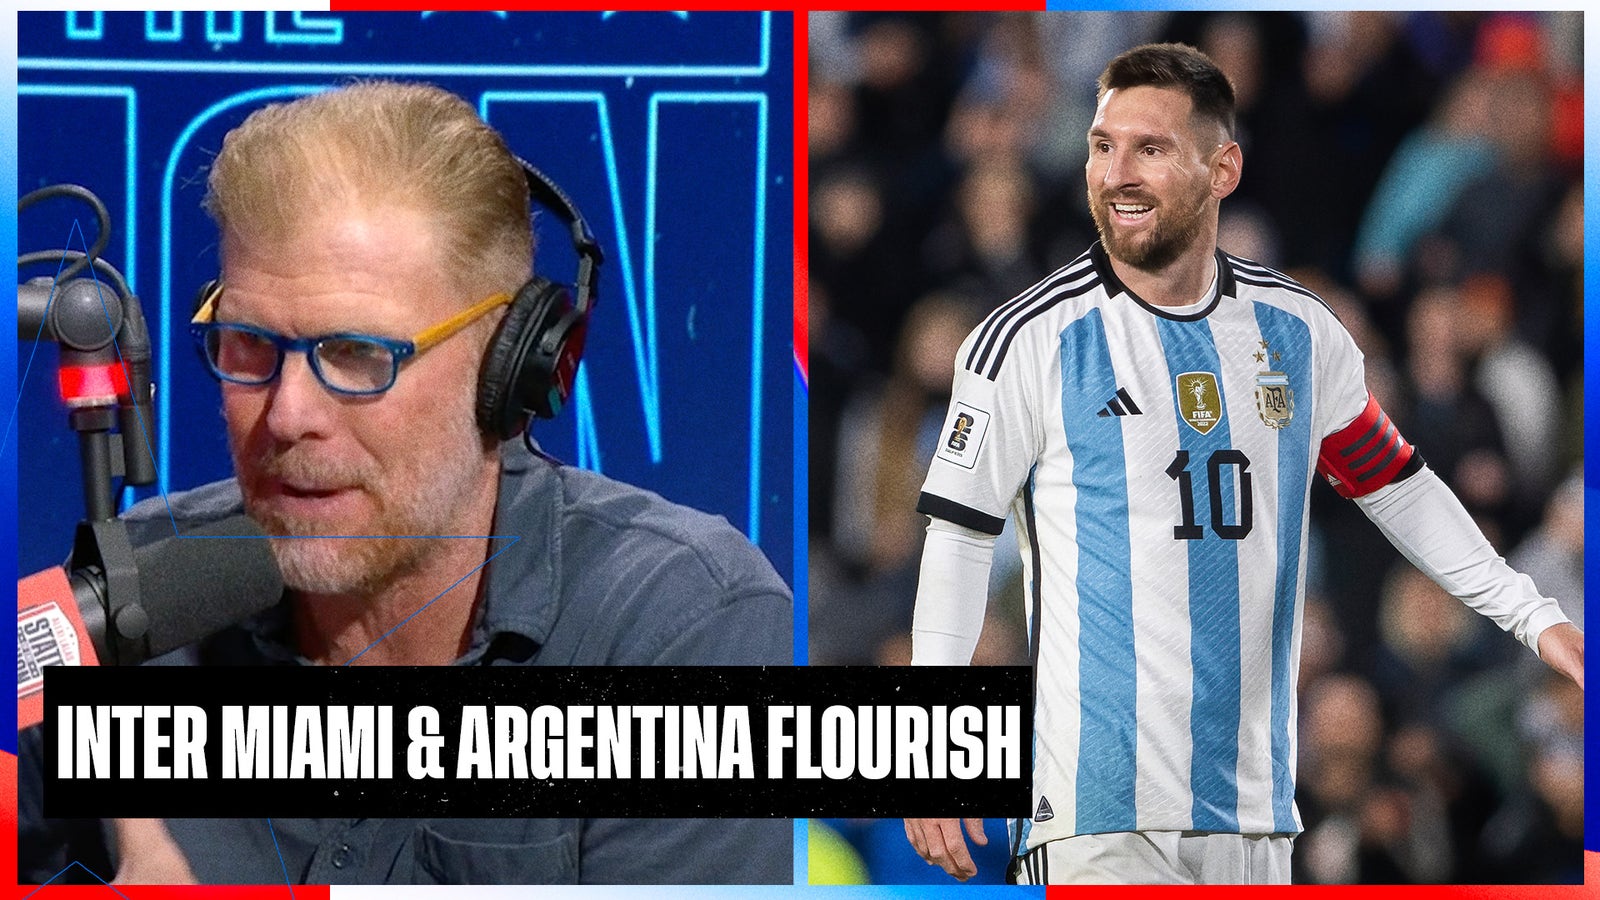 Inter Miami is cruising without Messi, and Argentina is flourishing with Messi